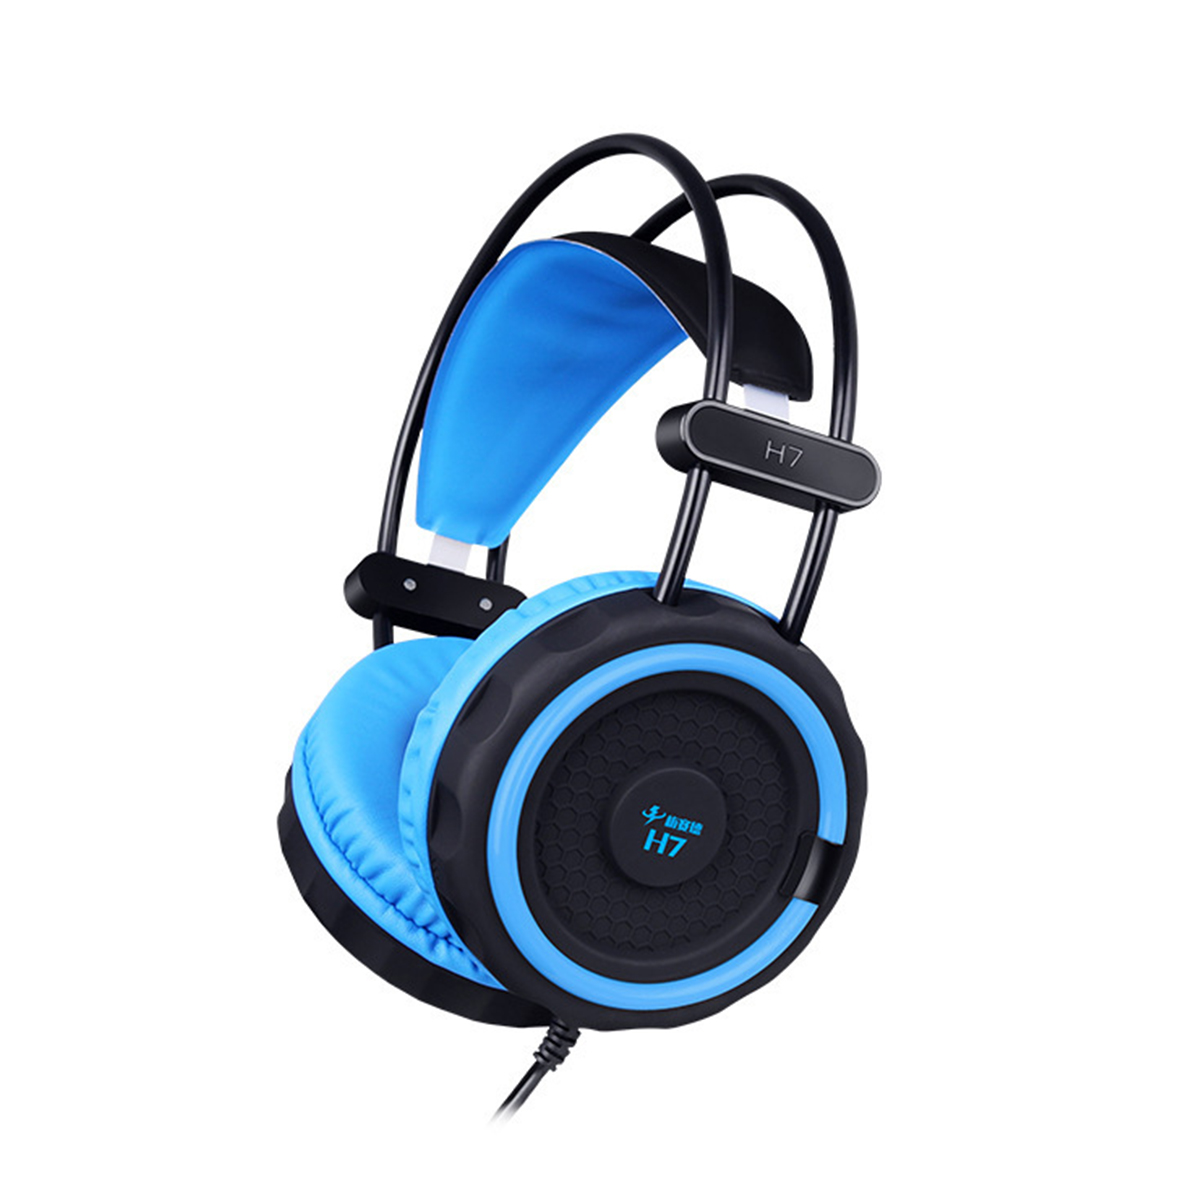 

H7 3.5mm Wired RGB Light Gaming Headphone Stereo Sound Headset for PC Game